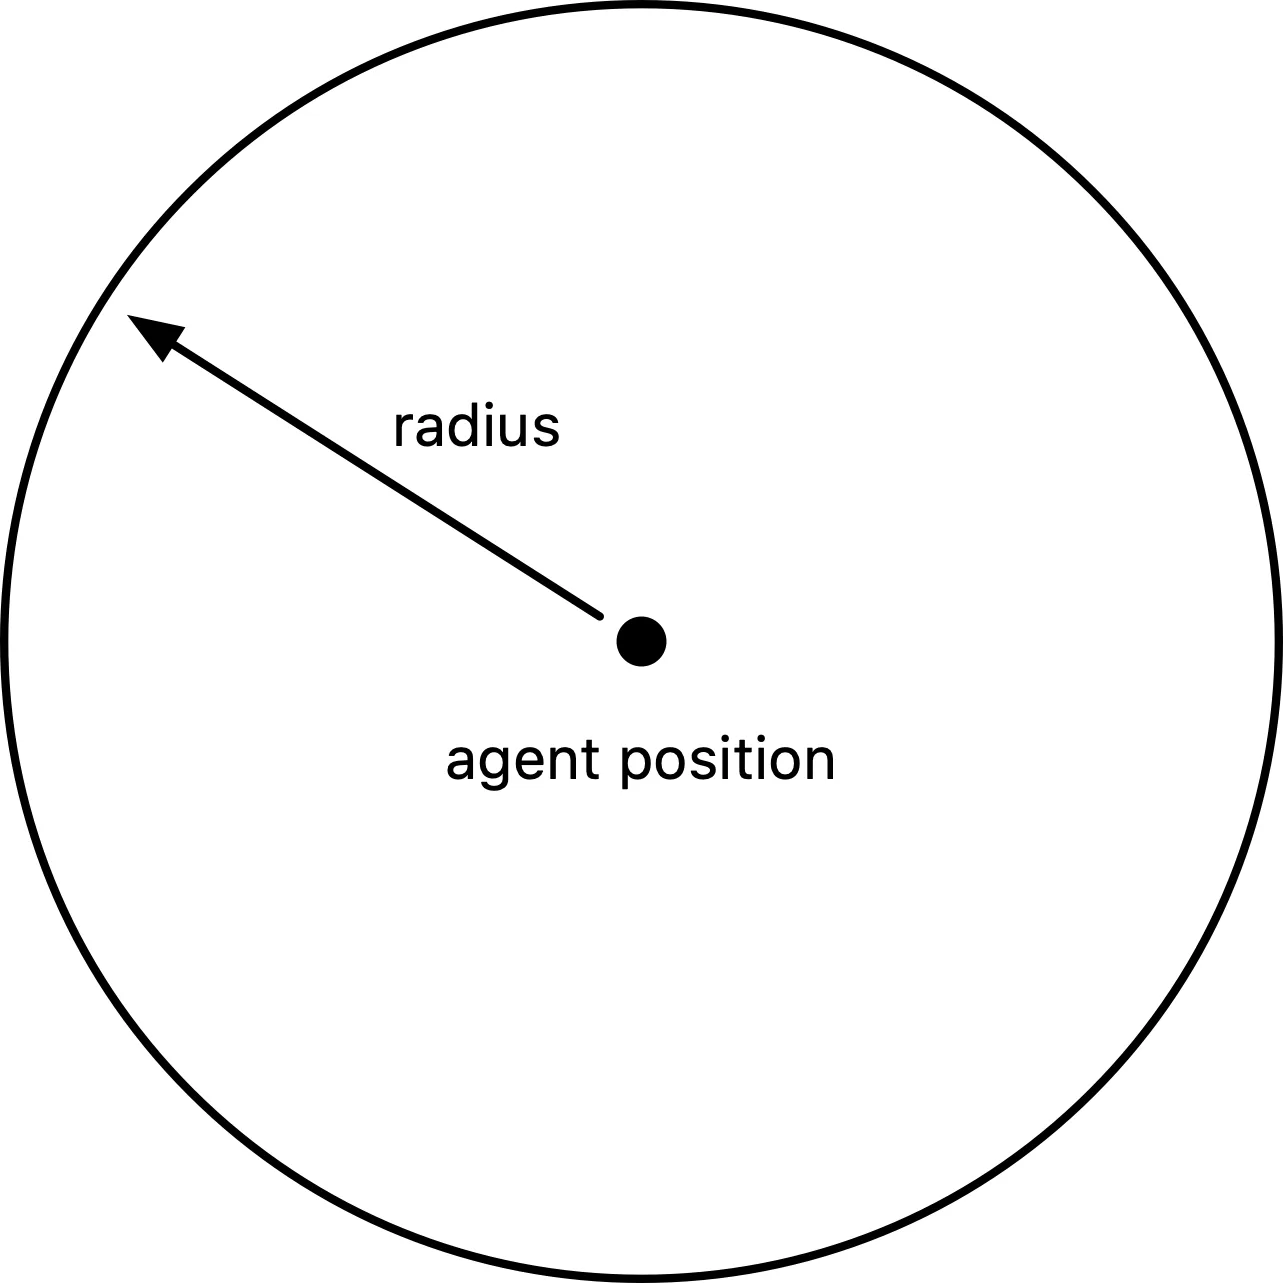 The radius determines how far the player can see